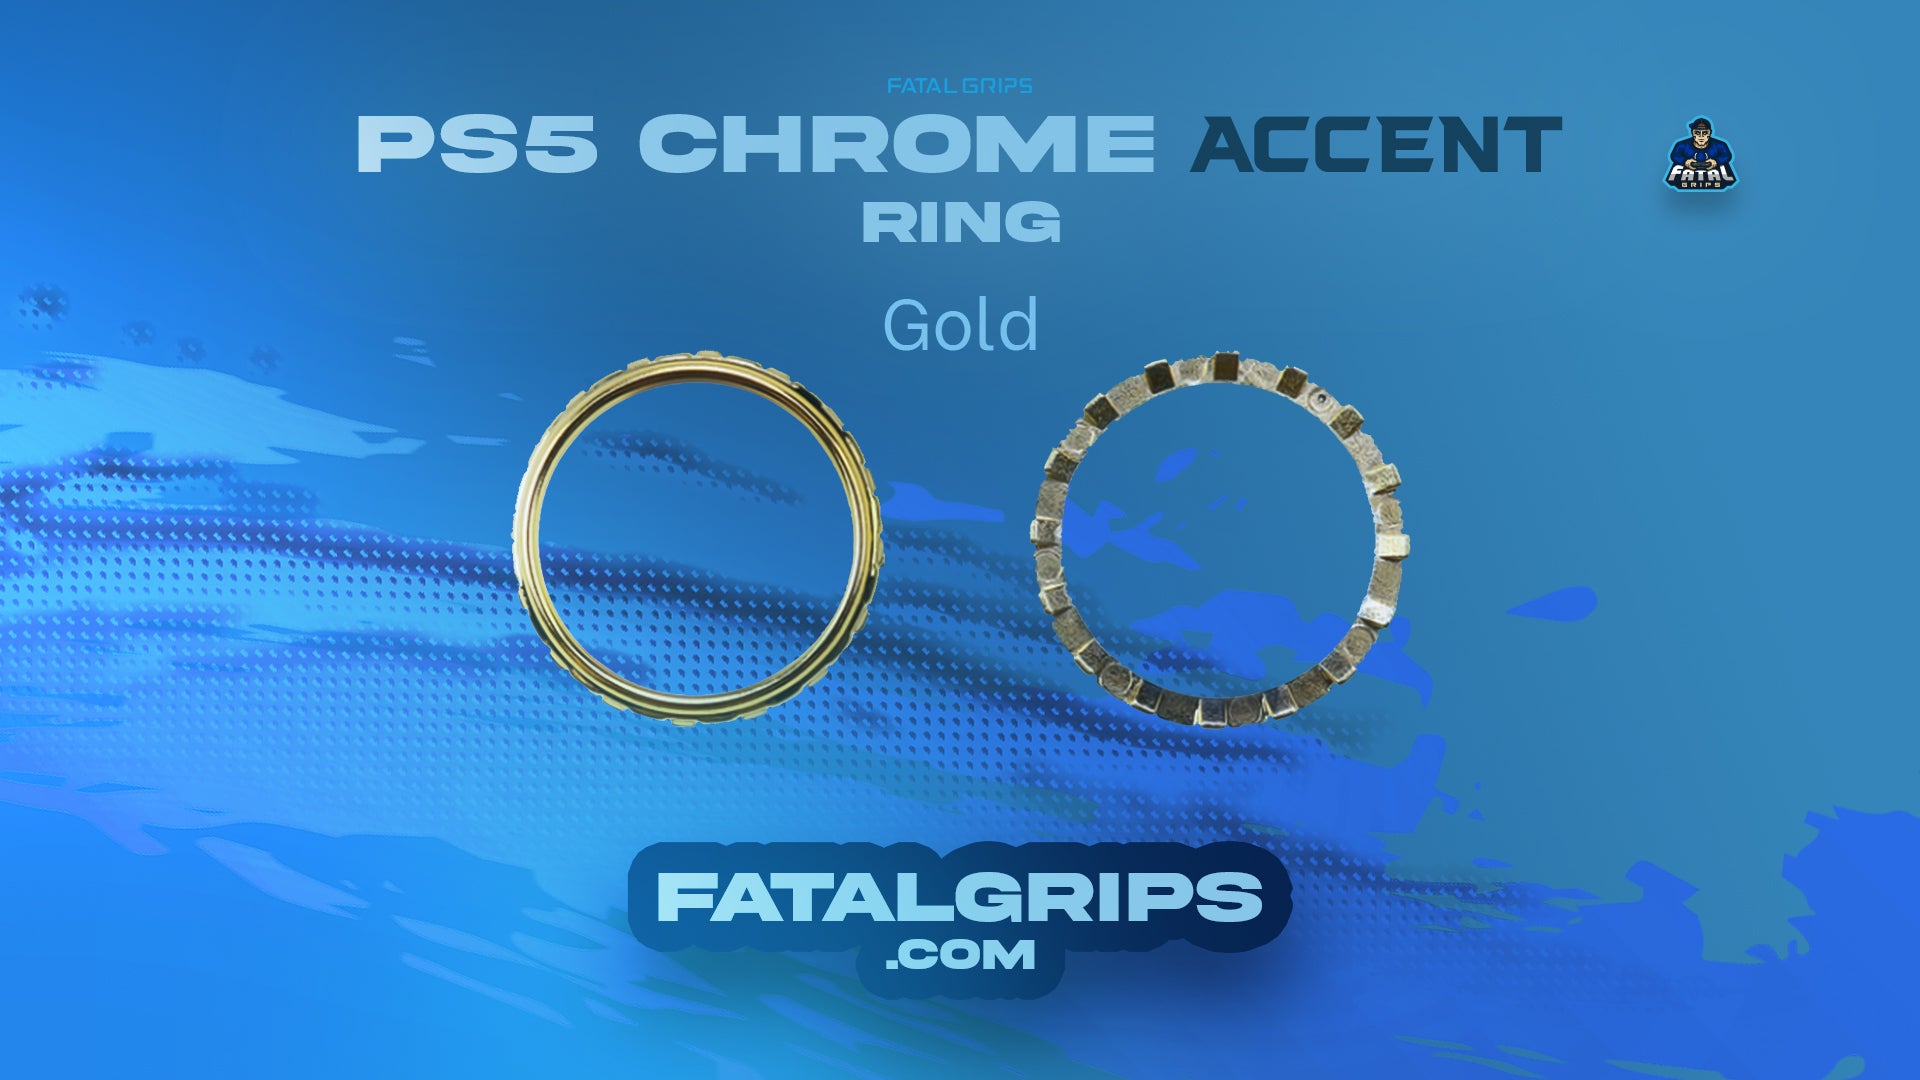 PS5 Chrome Accent Rings